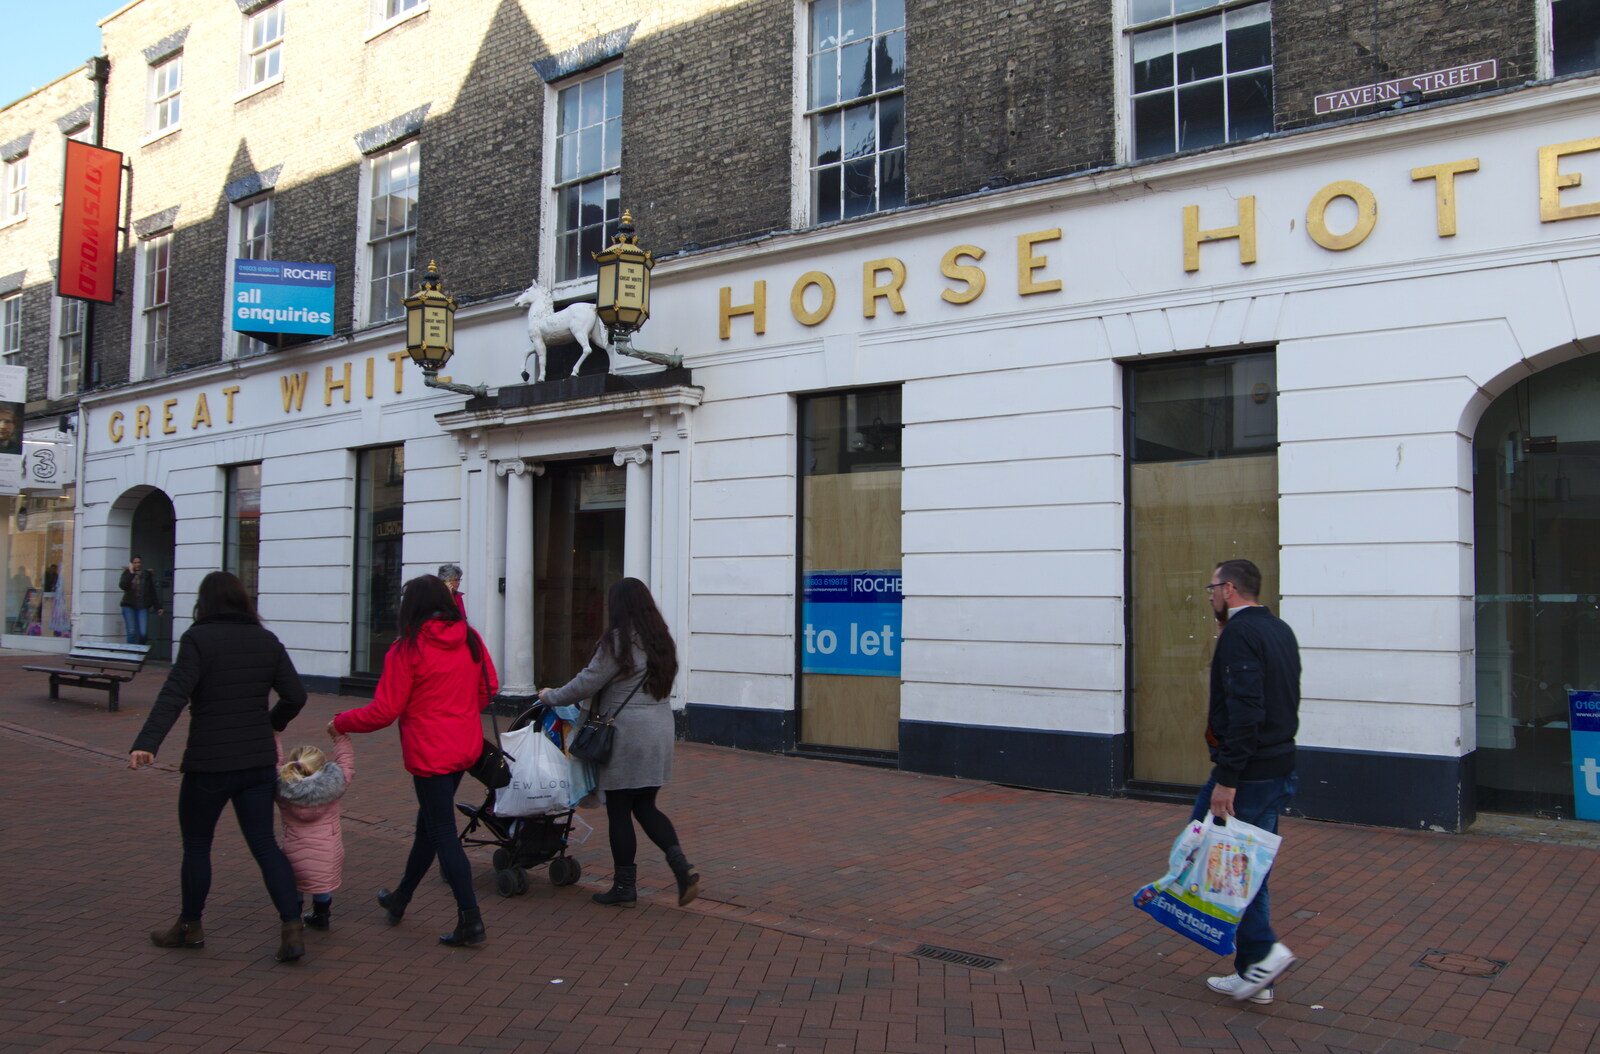 The Great White Horse is boarded up from Exam Day Dereliction, Ipswich, Suffolk - 13th November 2019